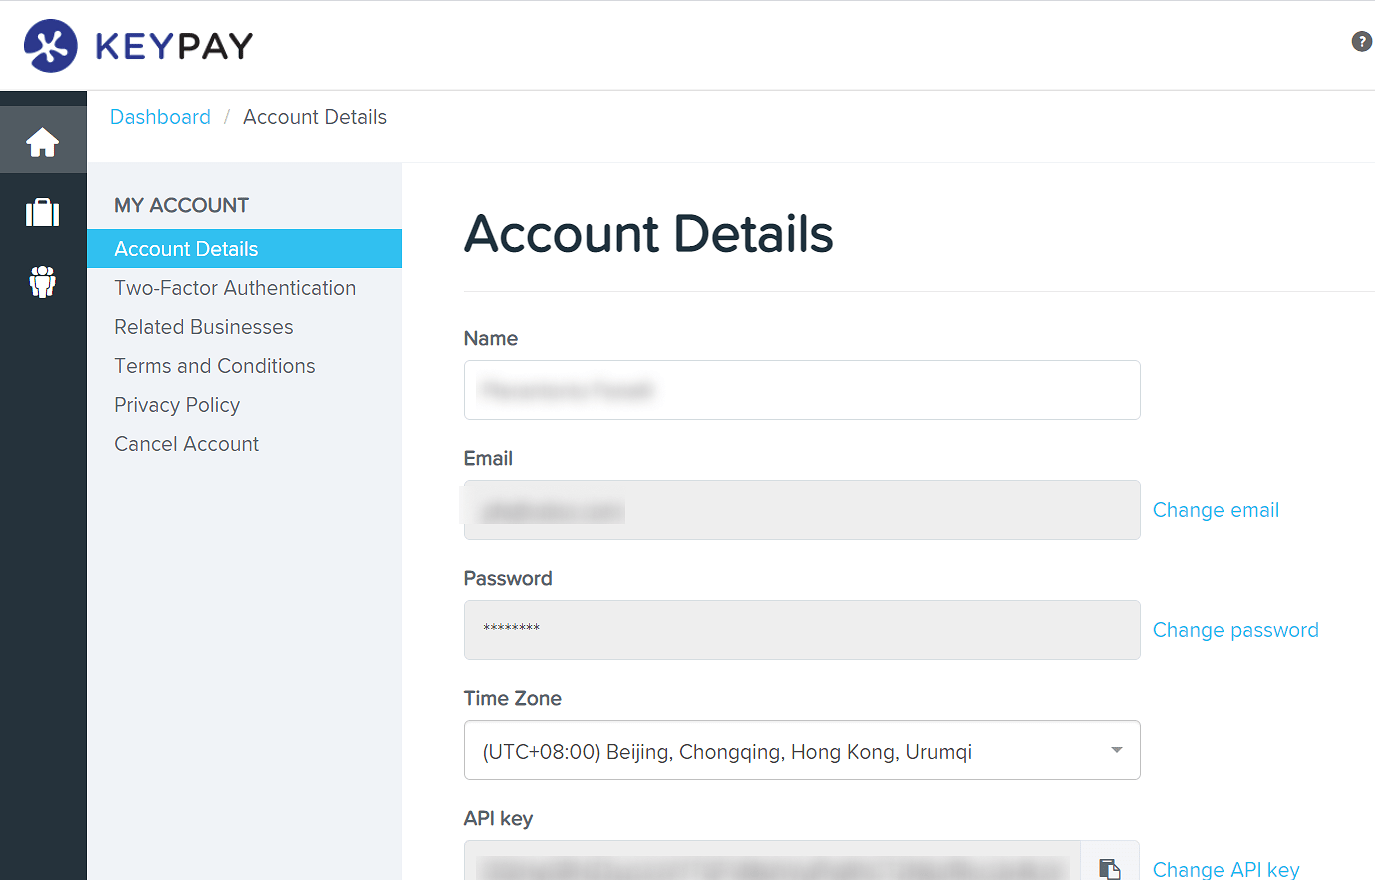 "Account Details" section on the KeyPay dashboard